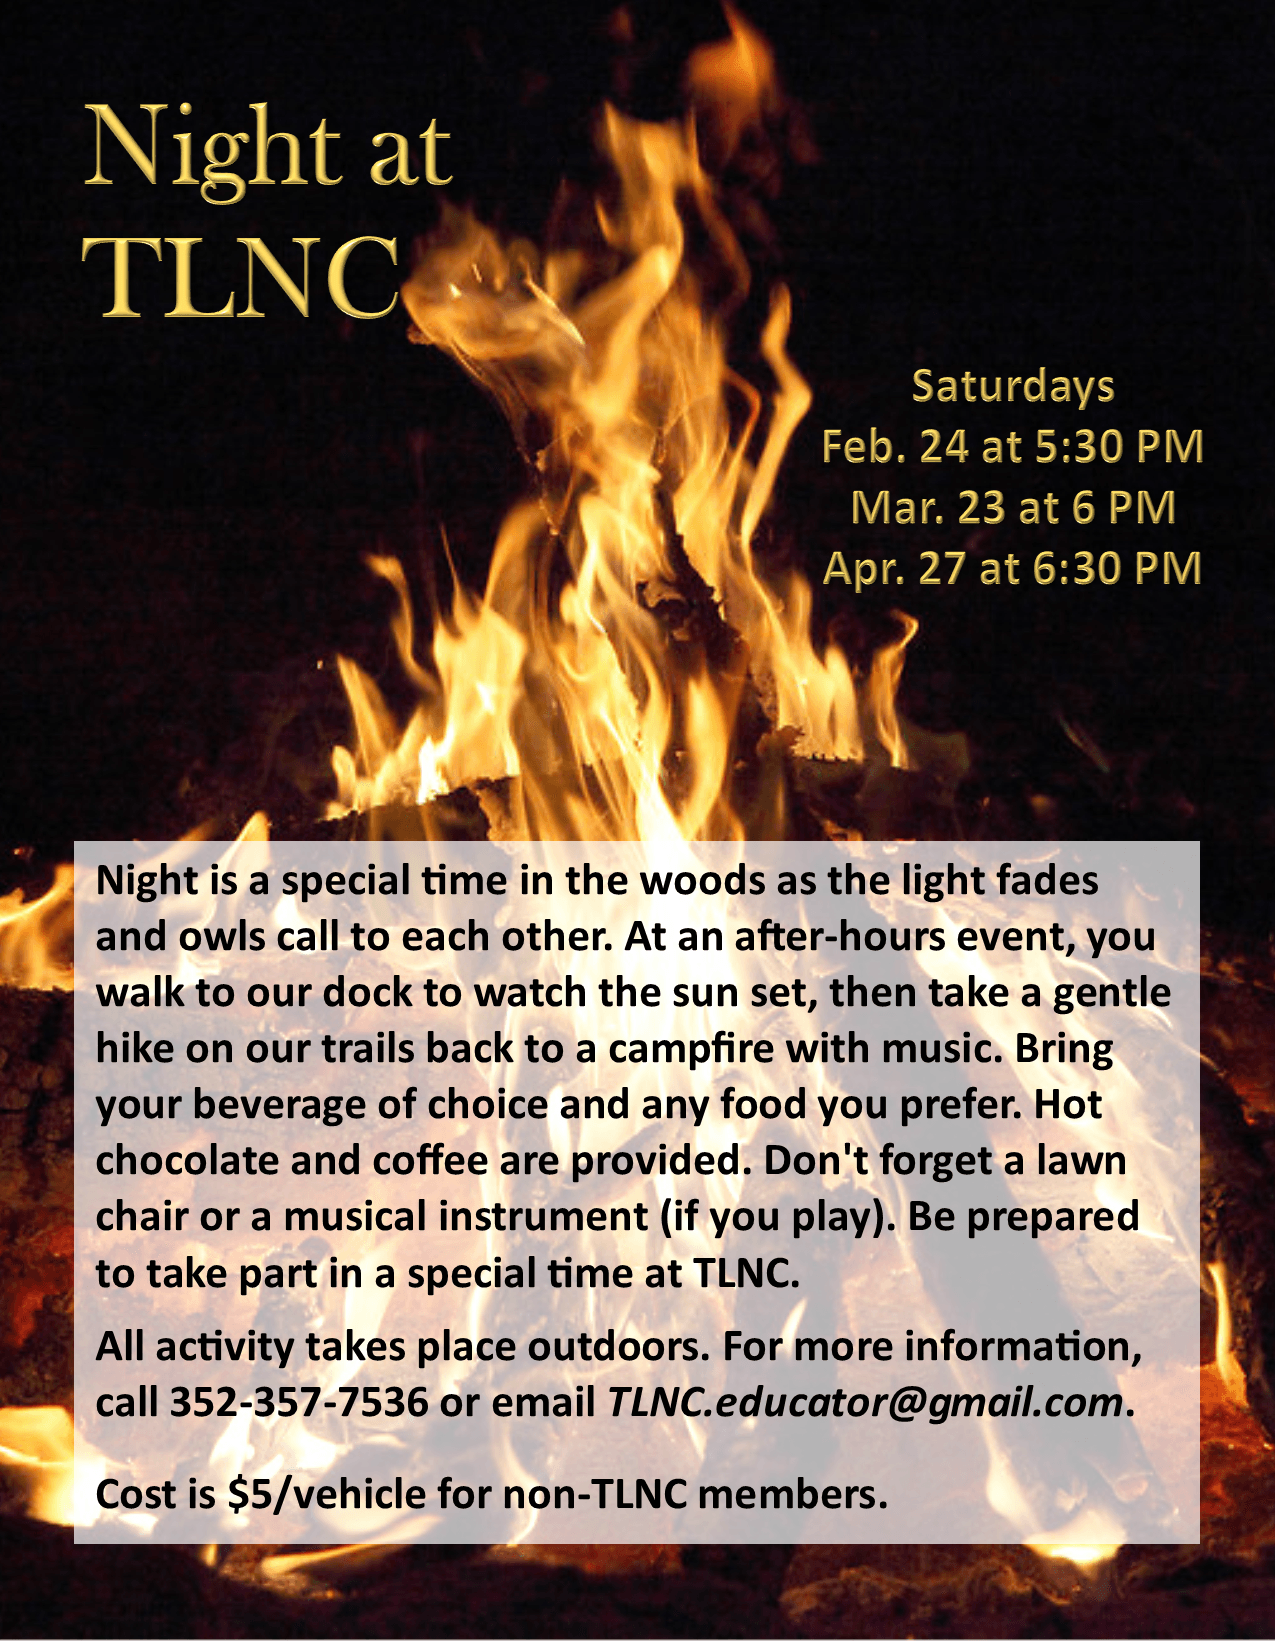 Crackling Campfire and Event Title and Dates. Night at TLNC, Saturdays Feb. 24 at 5:30 PM, March. 23 at 6 PM and April 27 at 6:30 PM